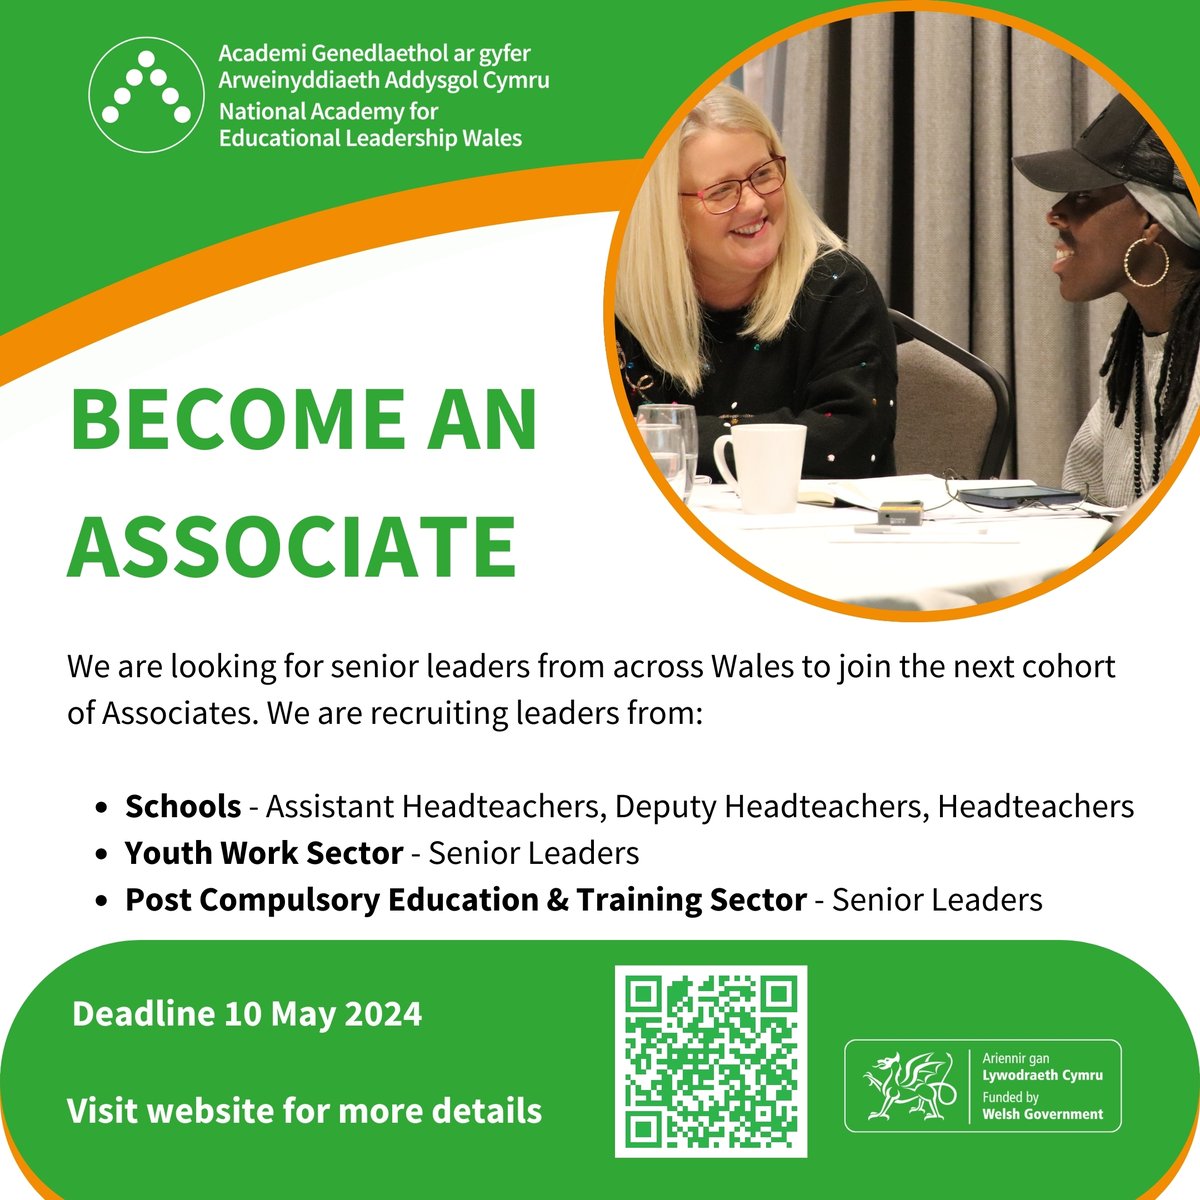 The #LeadershipAcademy are now welcoming applications from senior leaders from across Wales working in schools, the Youth Work sector and PCET to form the next Cohort of Associates. For more information, visit ow.ly/VIr350RabRA Deadline: 10 May @WG_Education